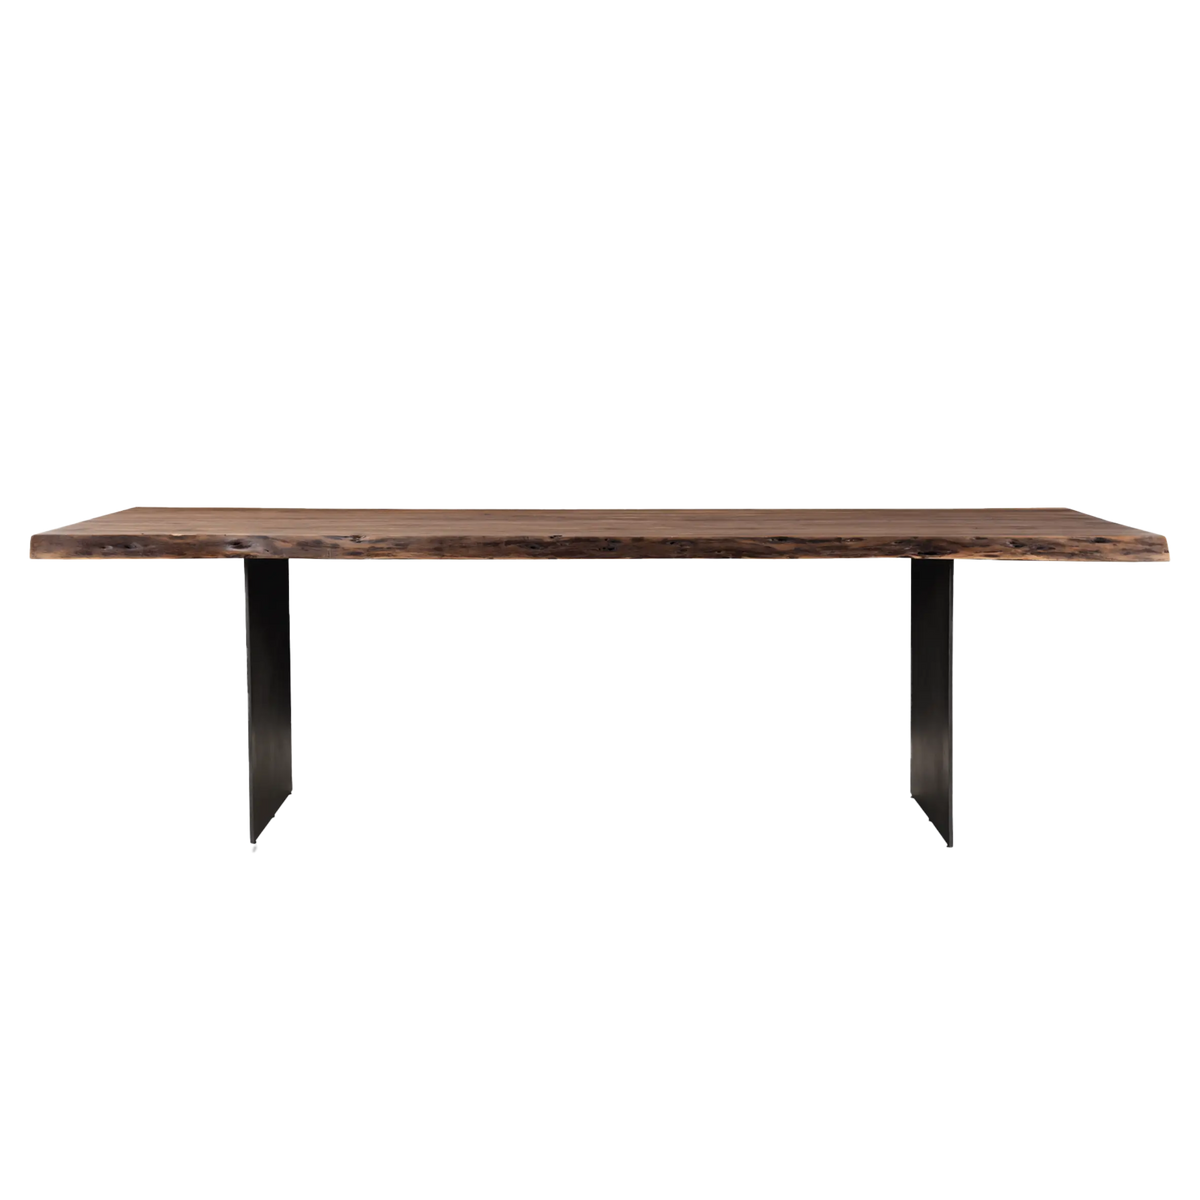 Sculpted from single slabs of wood, the Turin Dining Table elegantly displays its rustic styling.